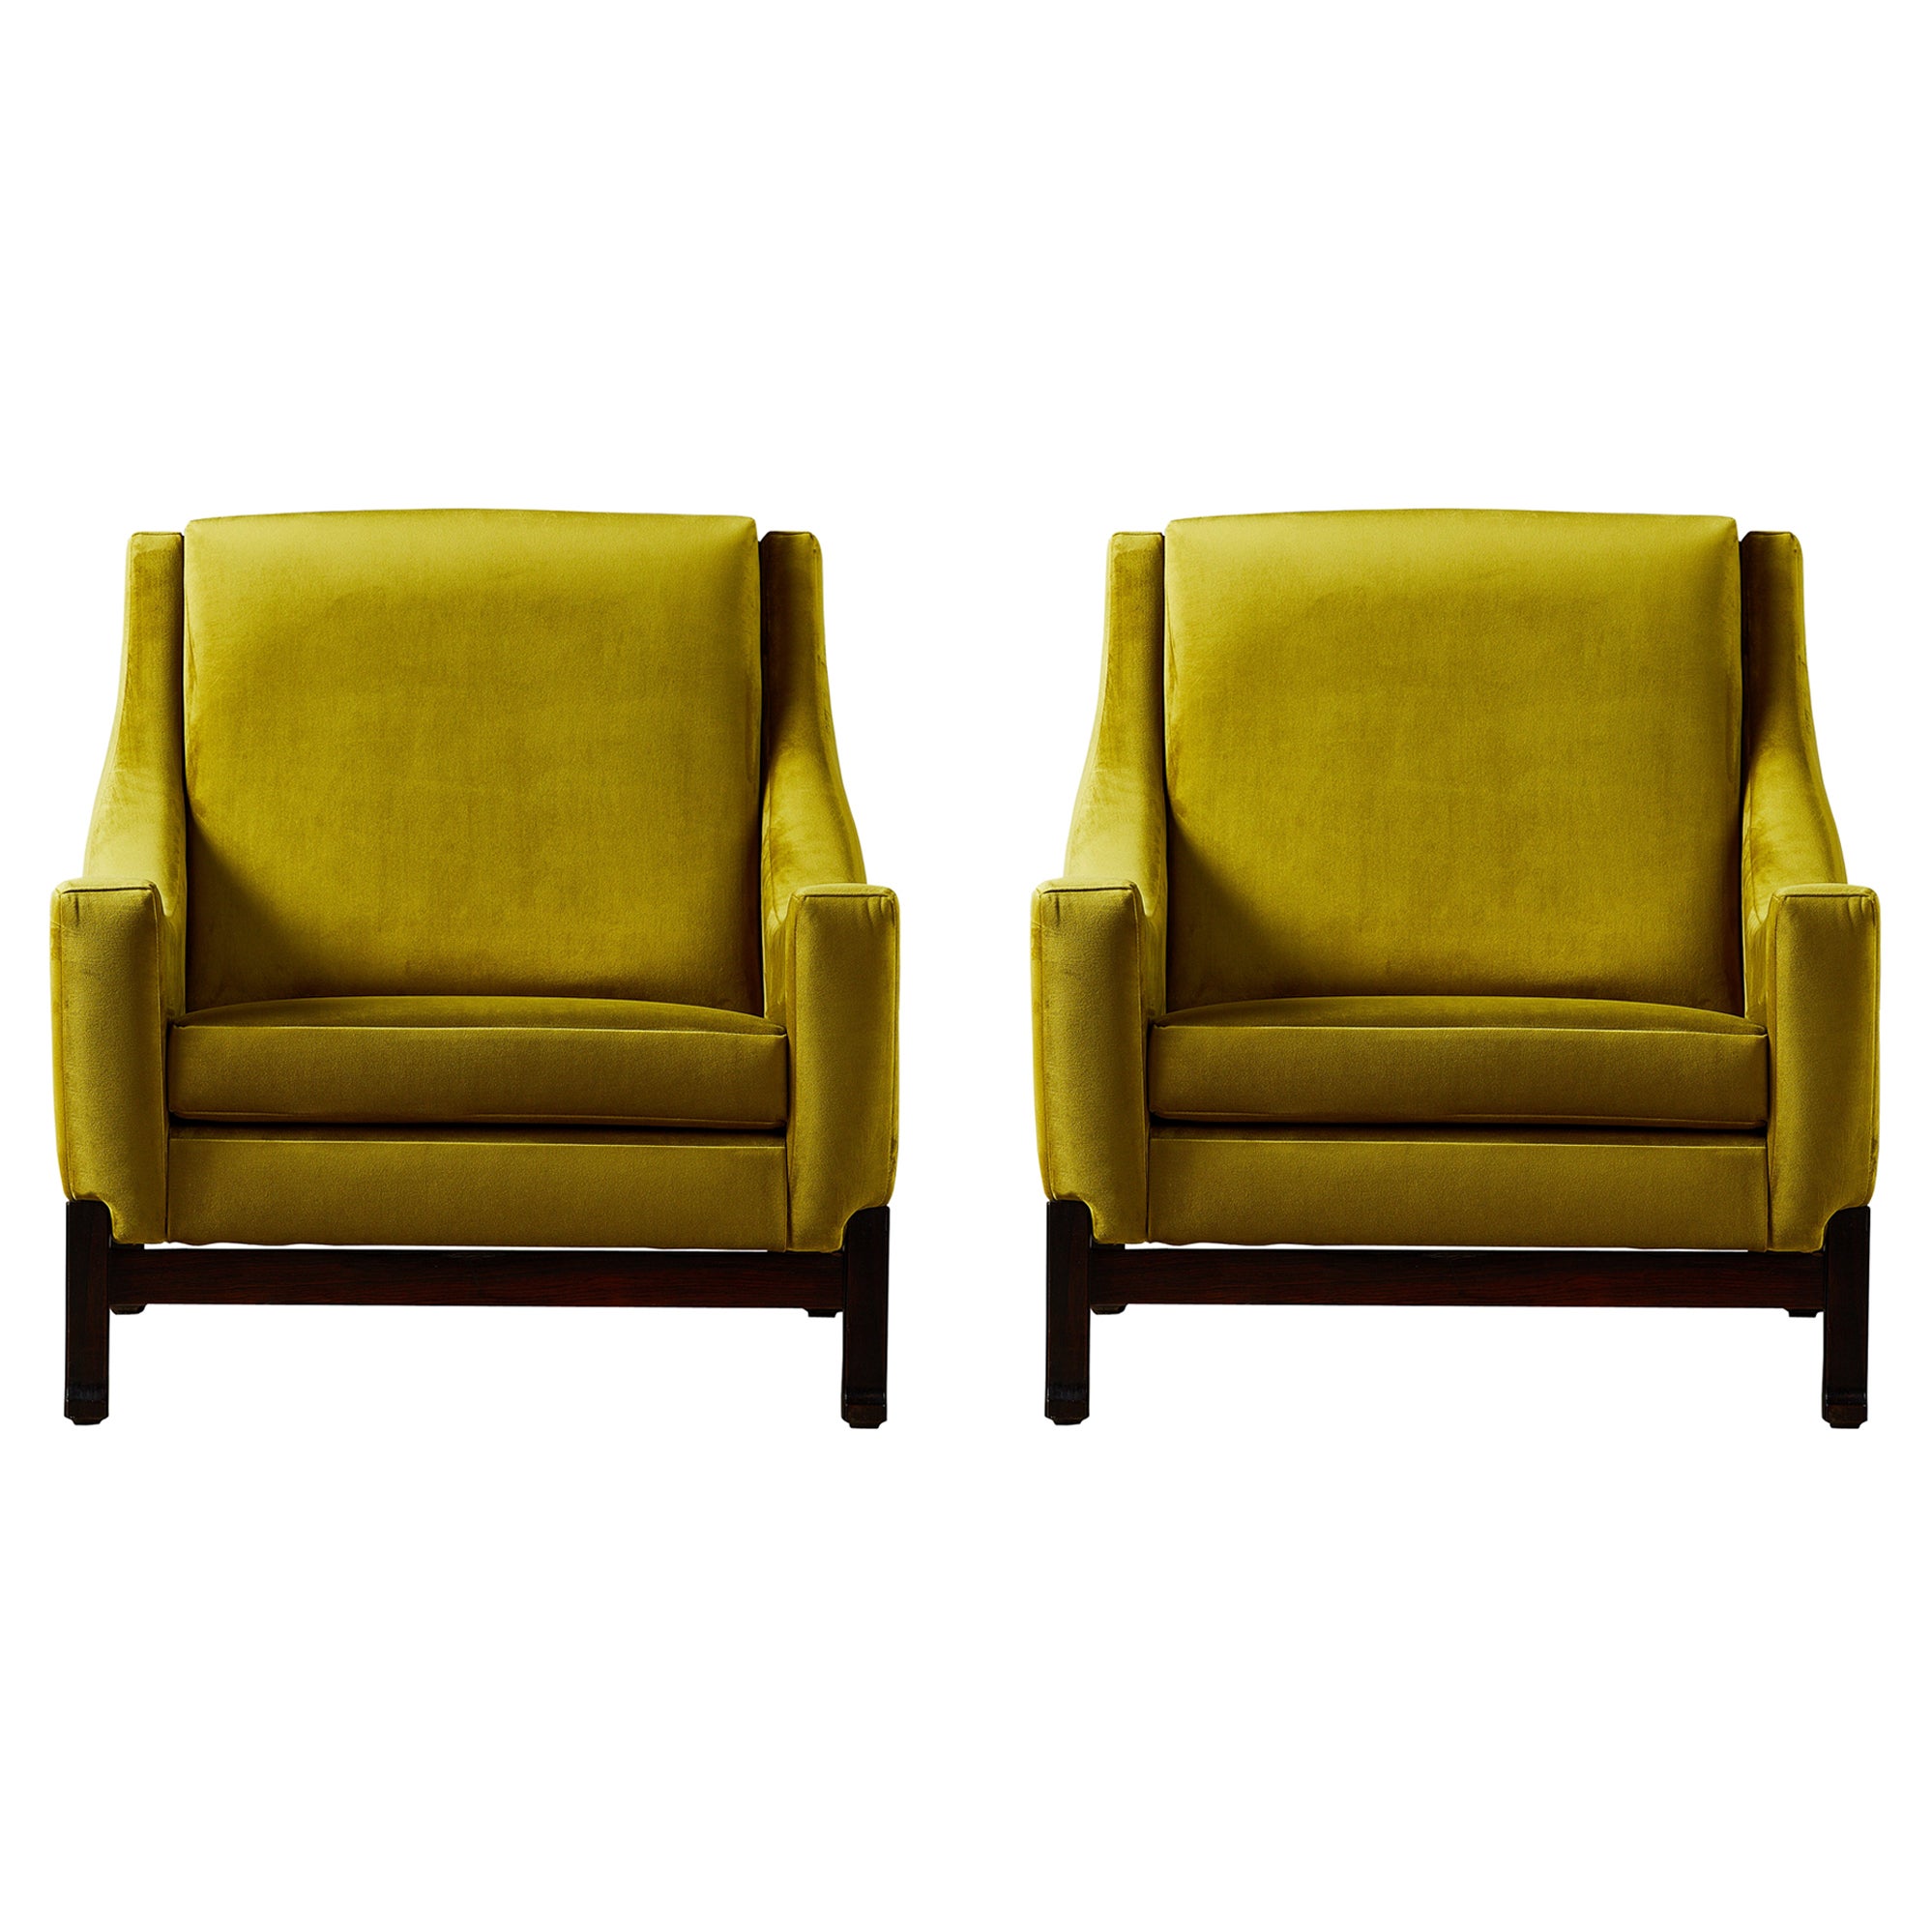 Pair of Vintage Armchairs by Saporiti, 1960 For Sale